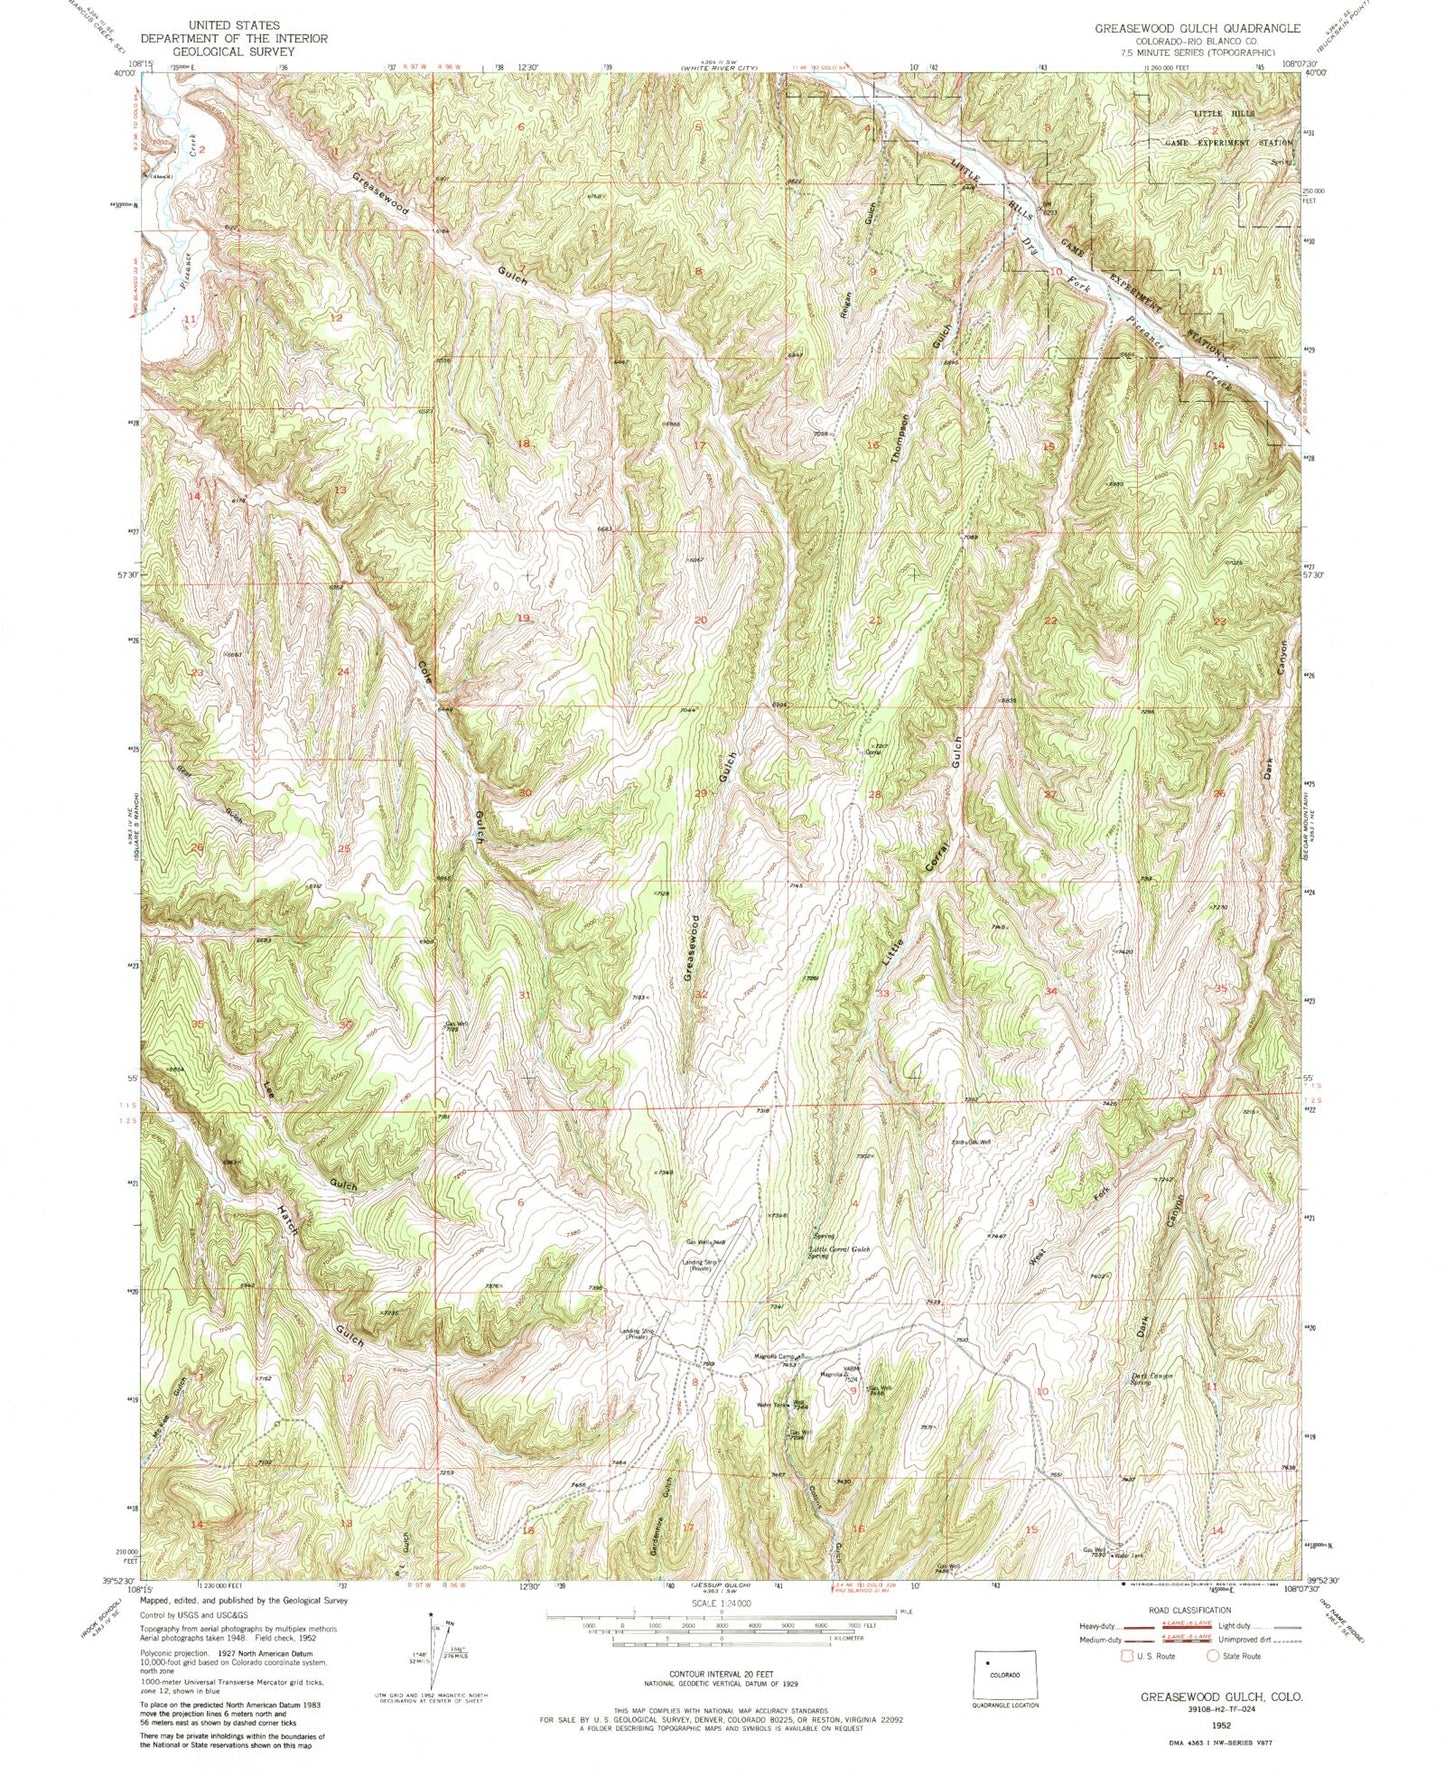 Classic USGS Greasewood Gulch Colorado 7.5'x7.5' Topo Map Image